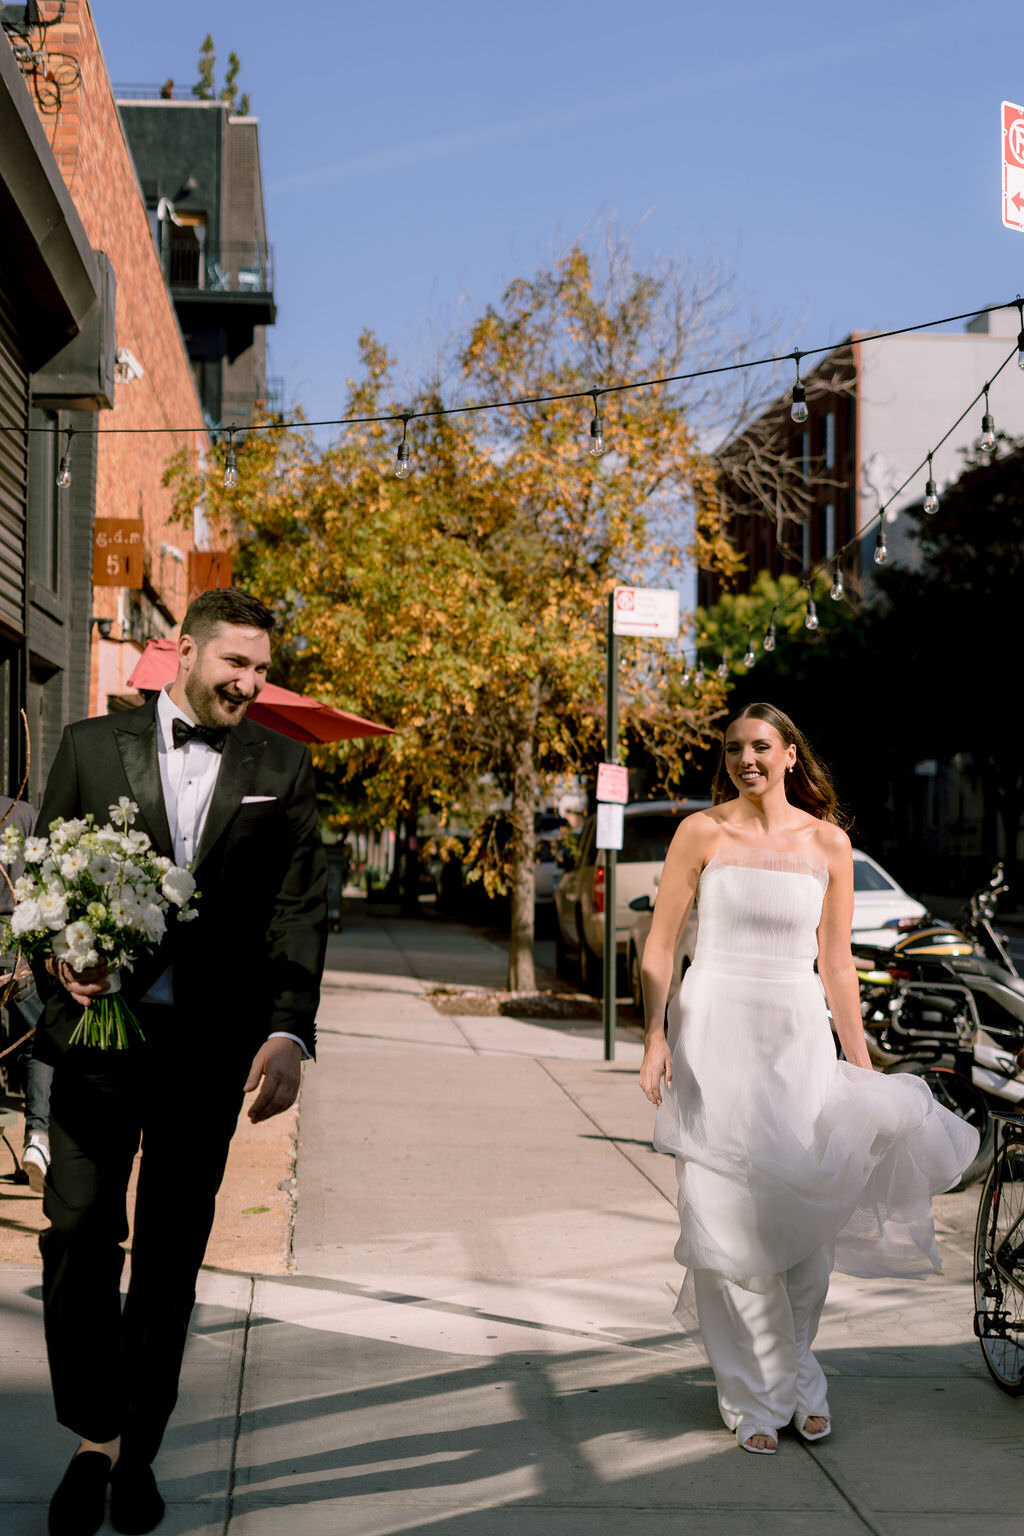 married couple walking down a sidewalk while the groom holds a bouquet